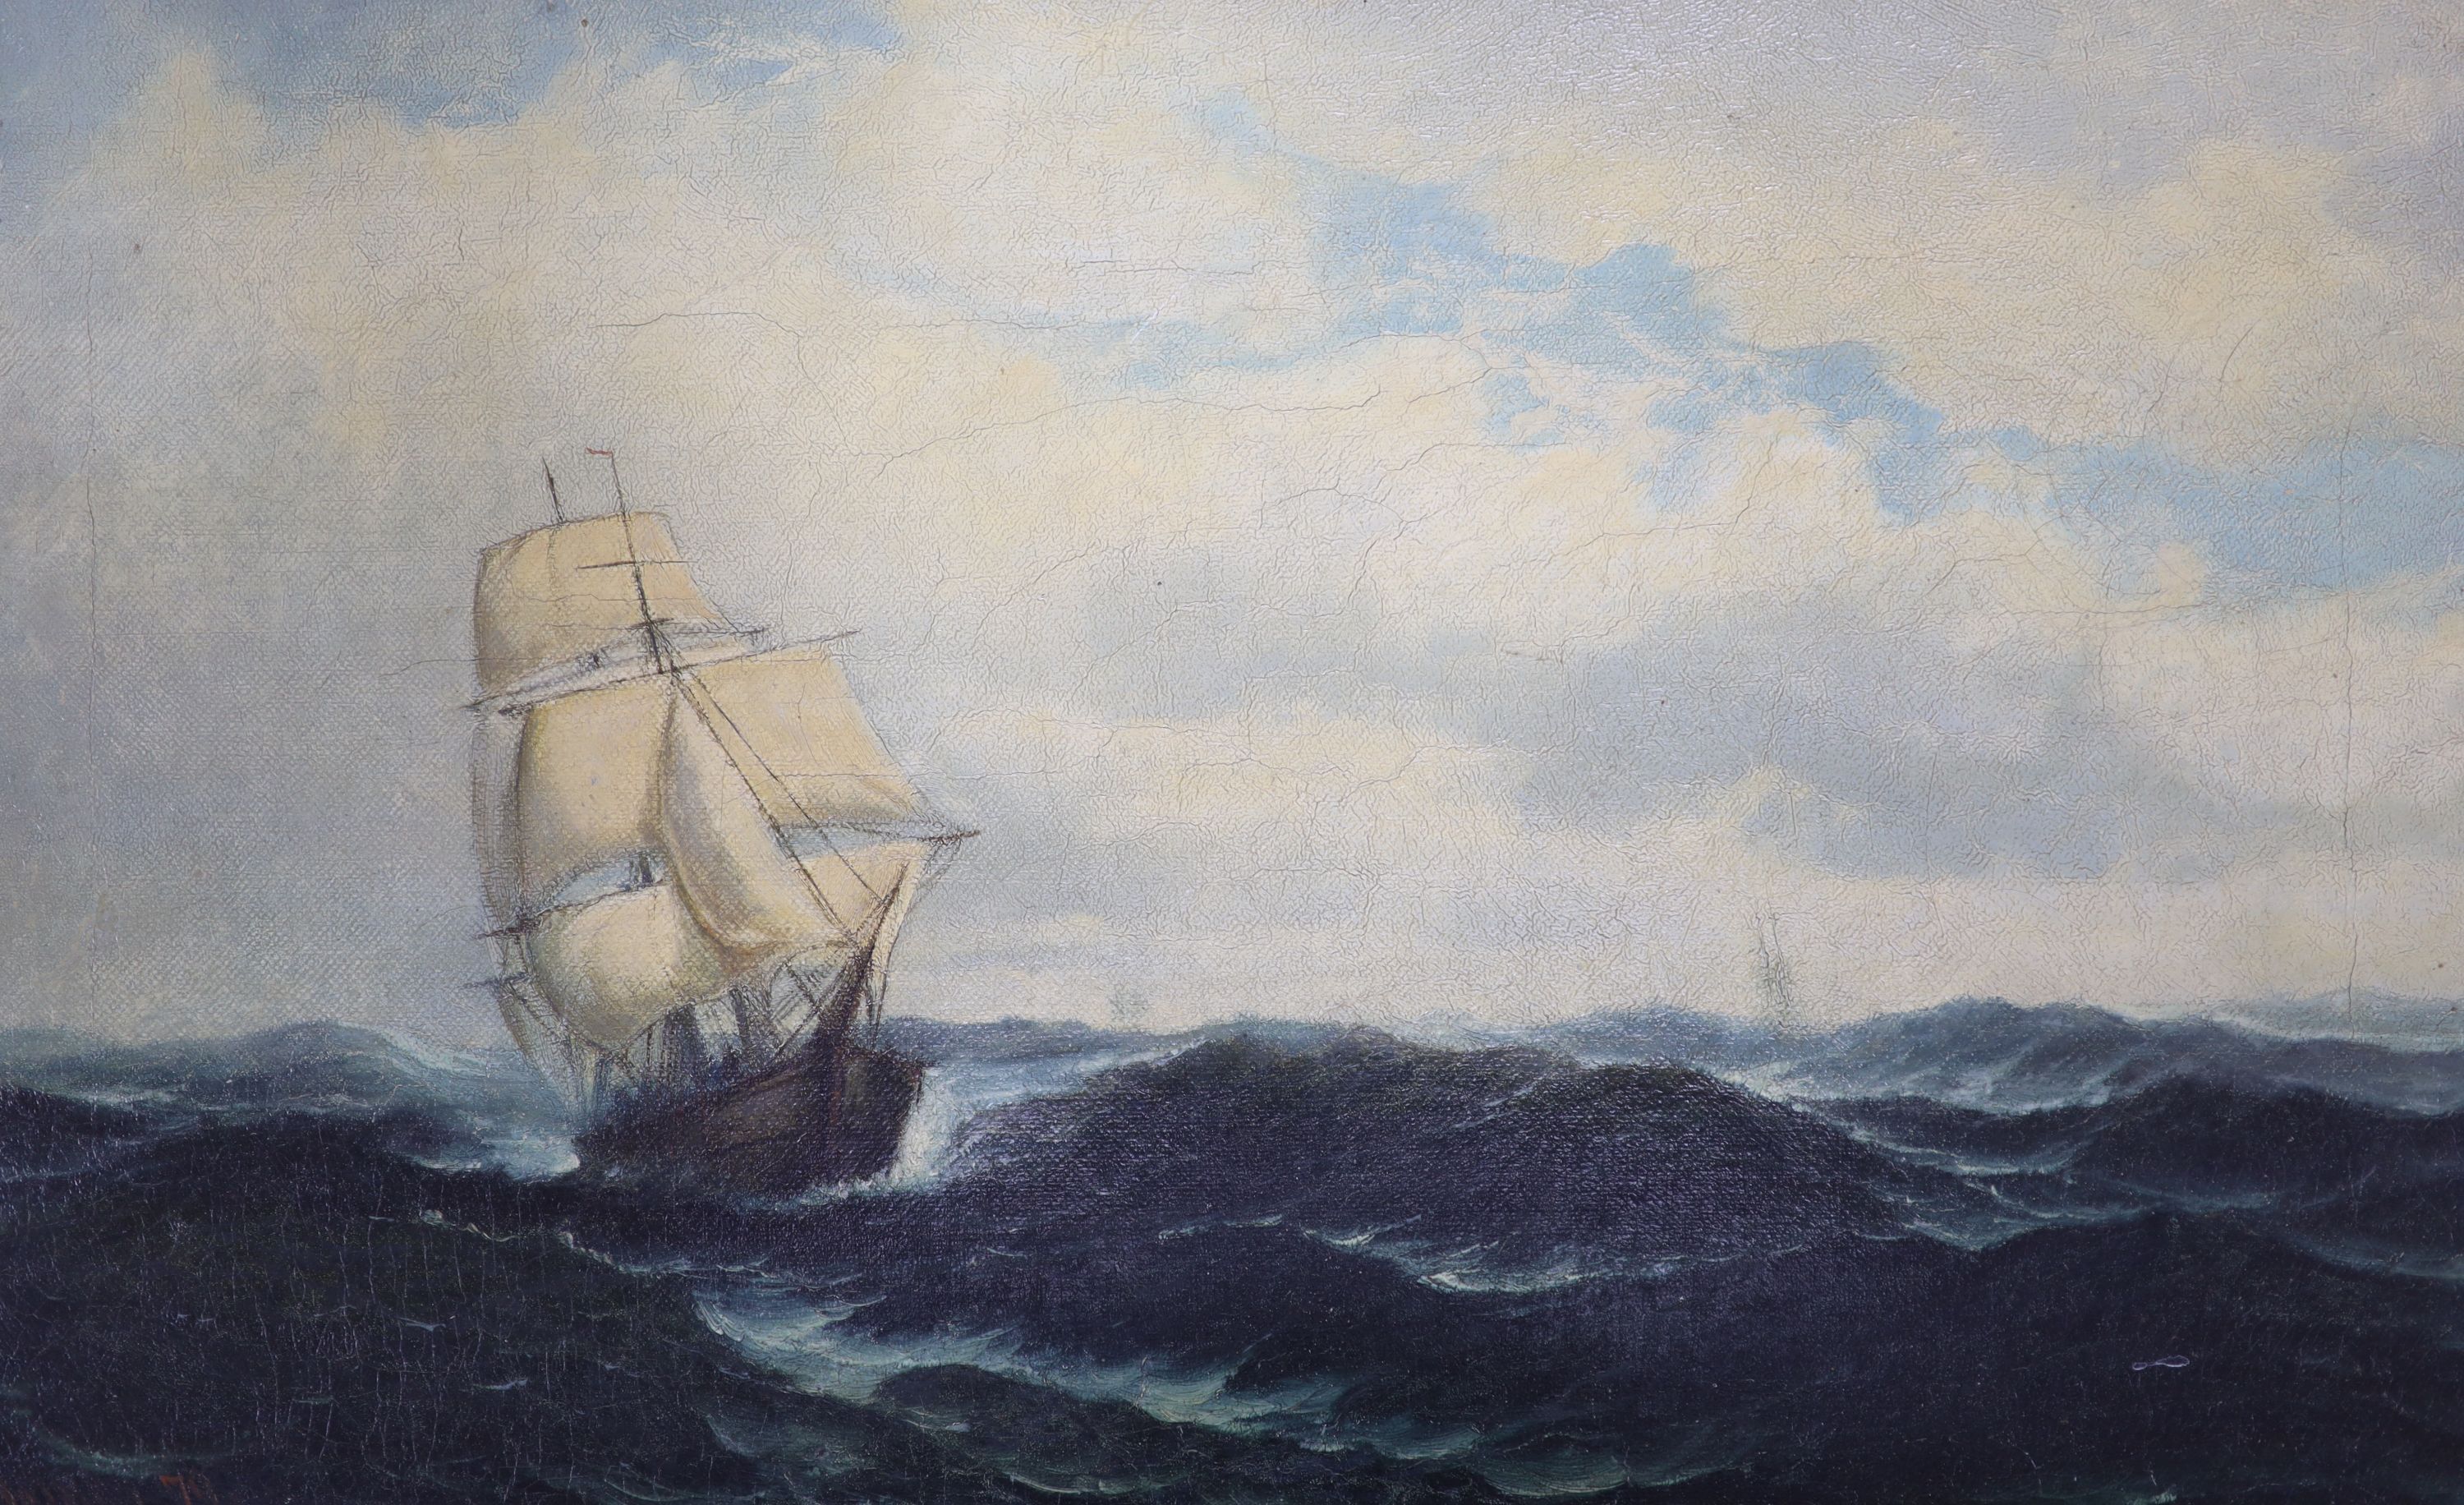 D. James, oil on canvas, Sailing ship at sea, signed and dated '79, 30 x 51cm